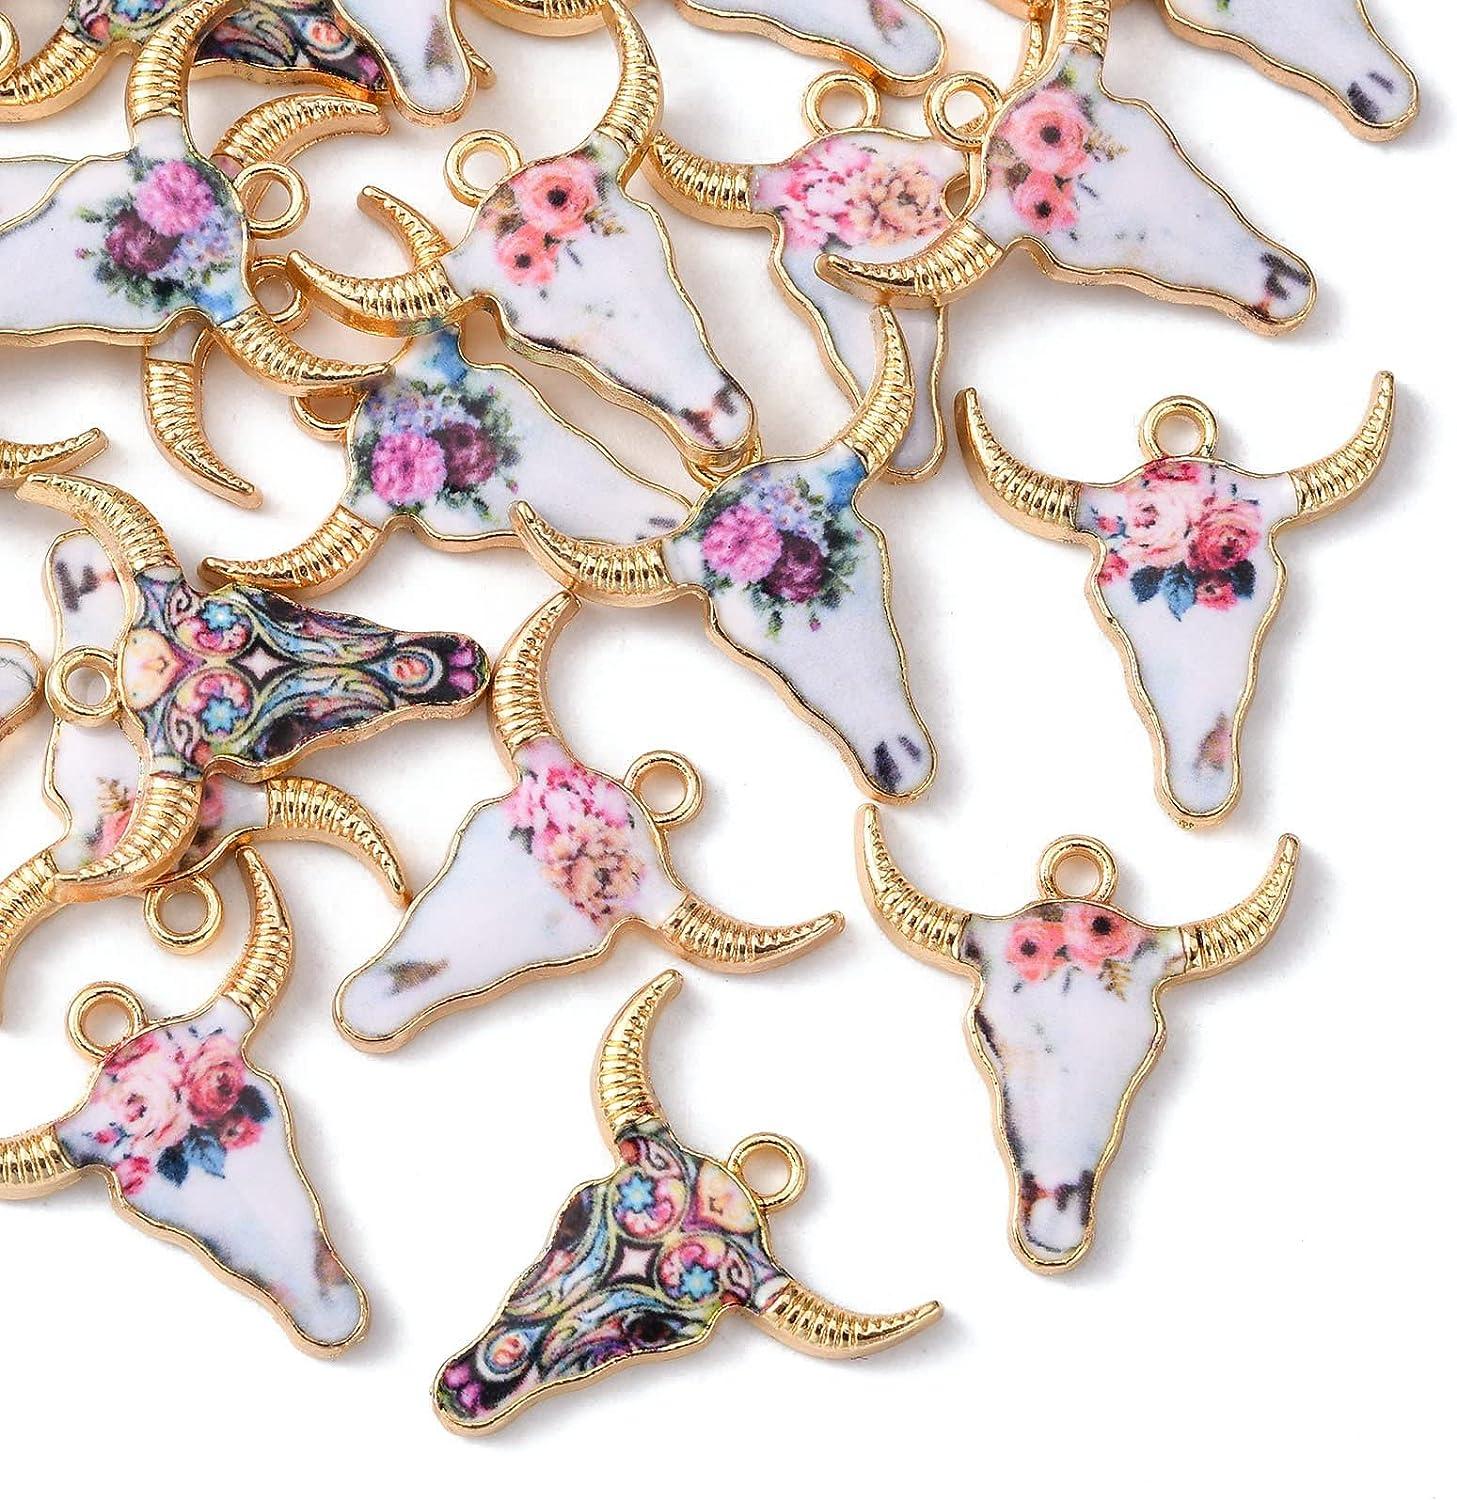 KitBeads 50pcs Enamel Cattle Cow Charms Flower Cattle Charms Alloy Cow  Animal Head Charms for Jewelry Making Bracelet 50pcs - Cattle - 5 Colors